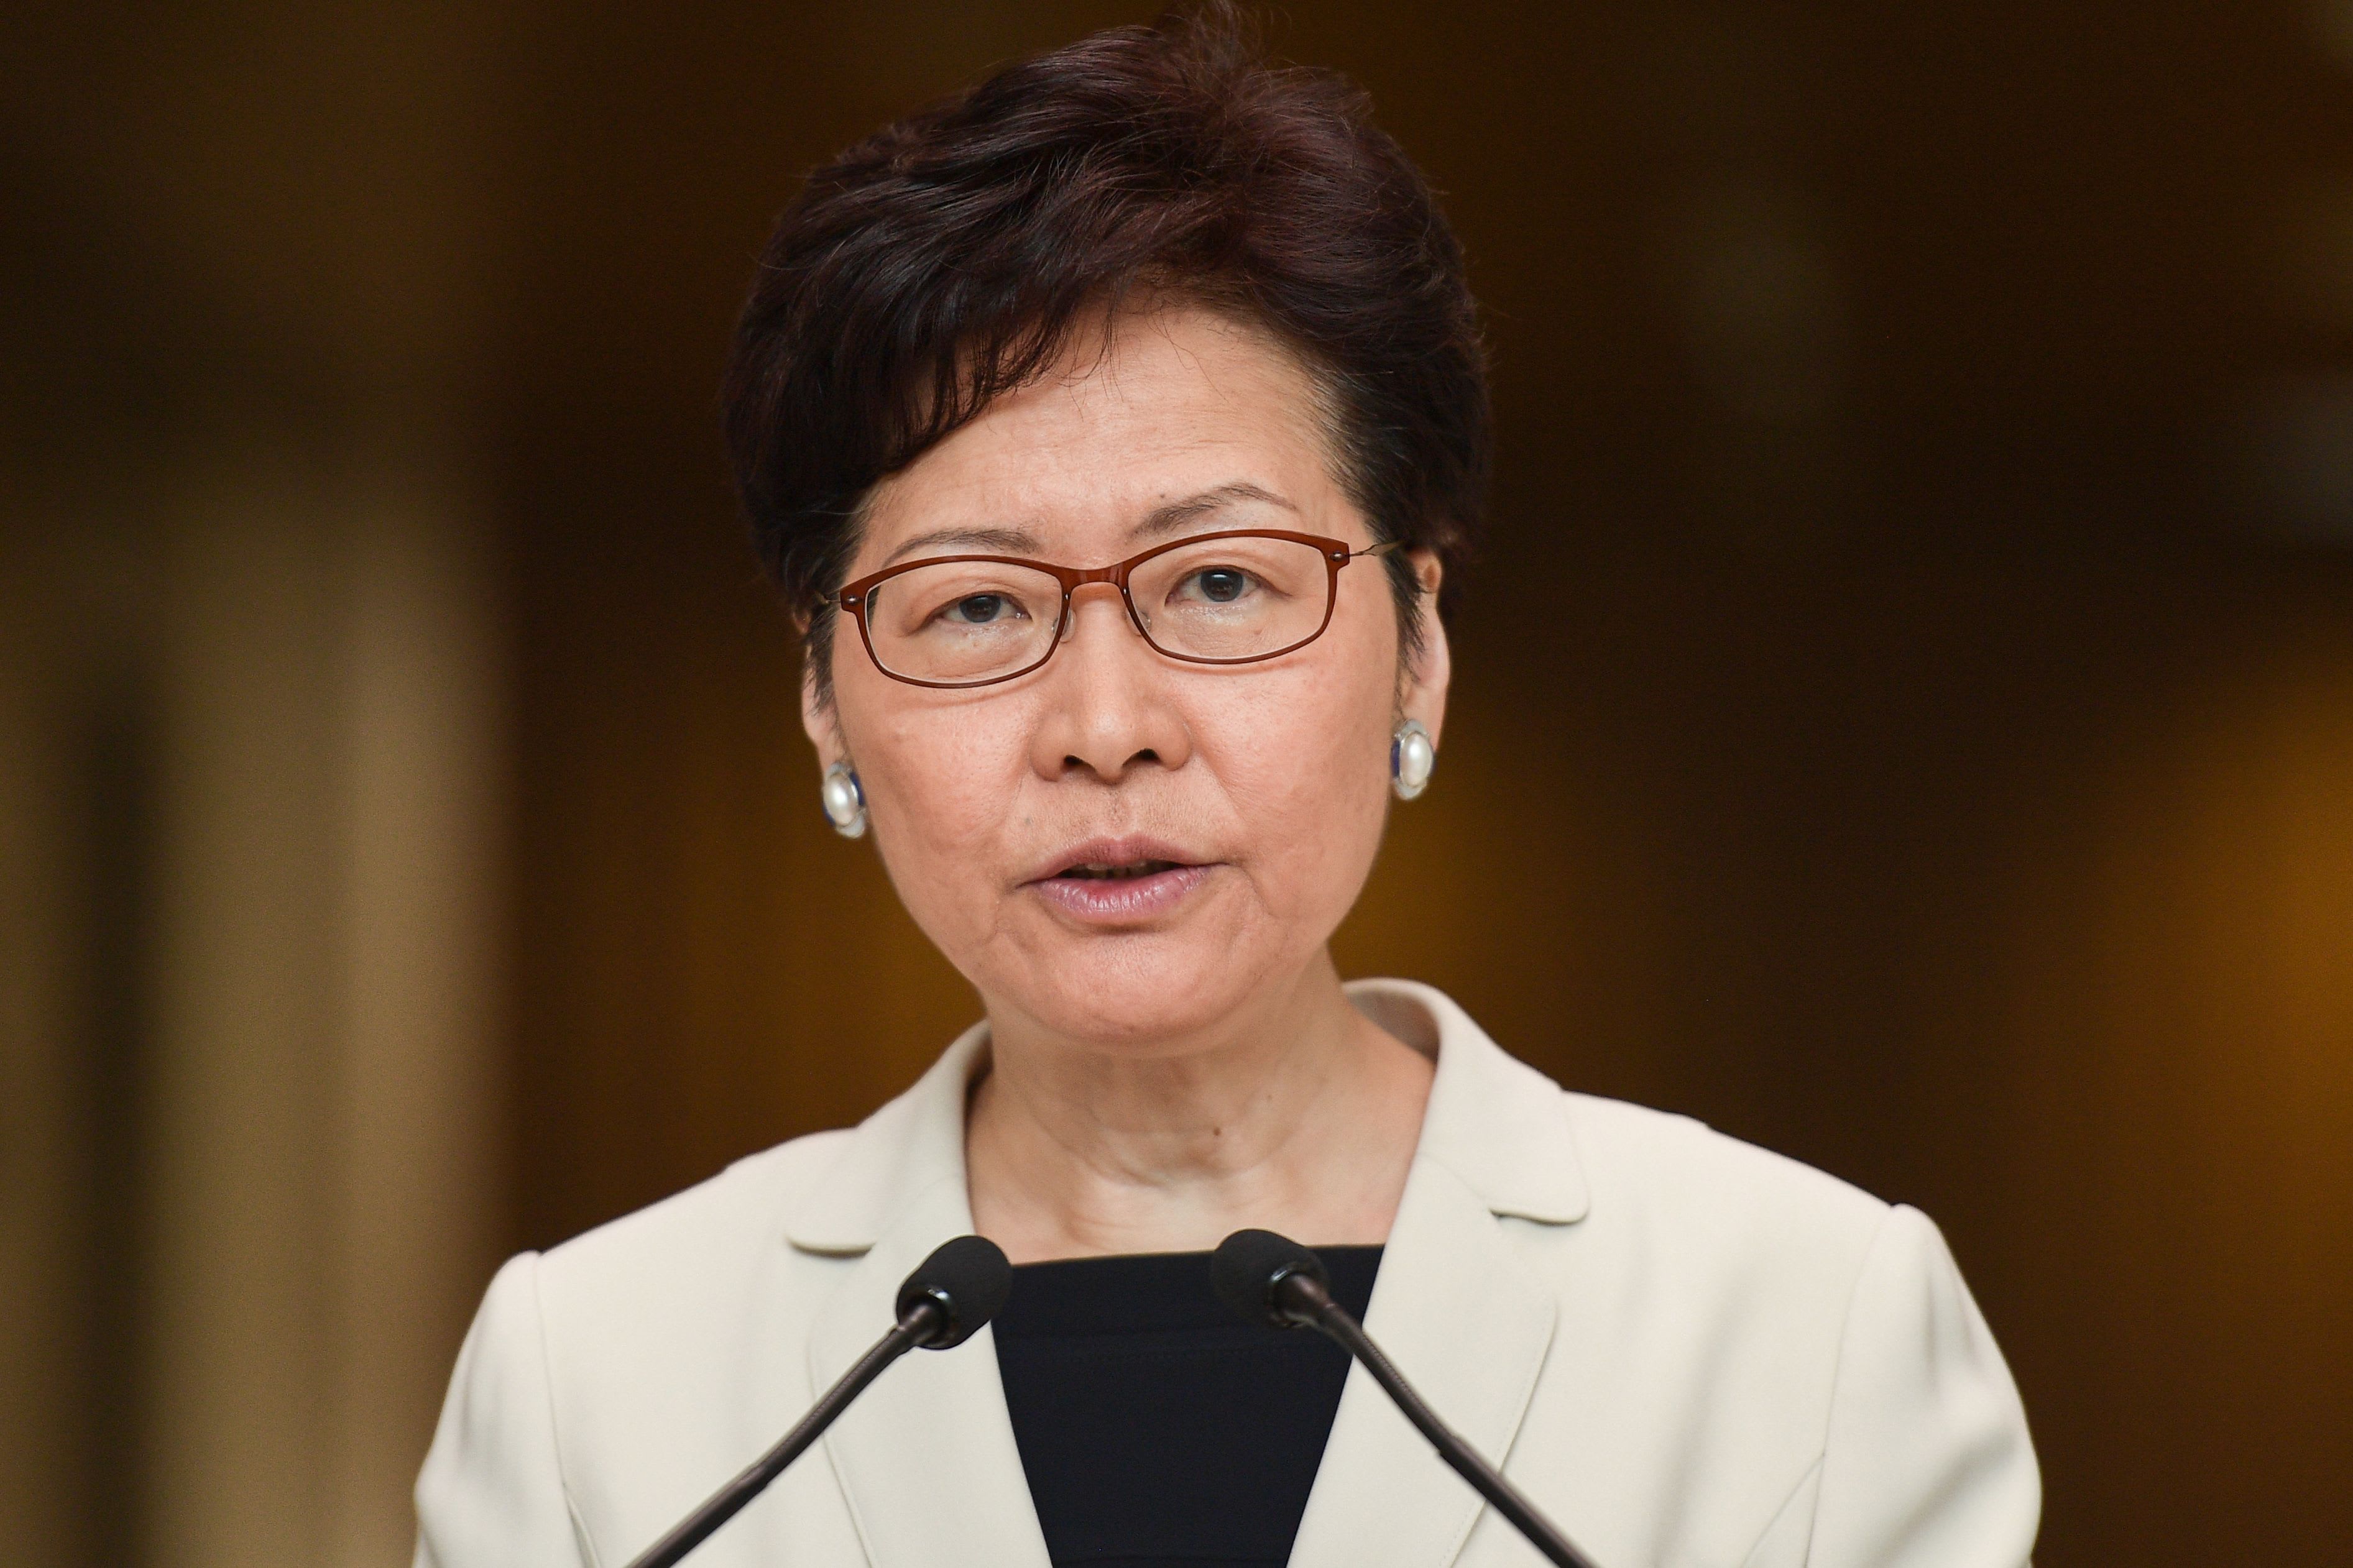 Hong Kong leader Carrie Lam says she's 'very disappointed' by rating downgrade